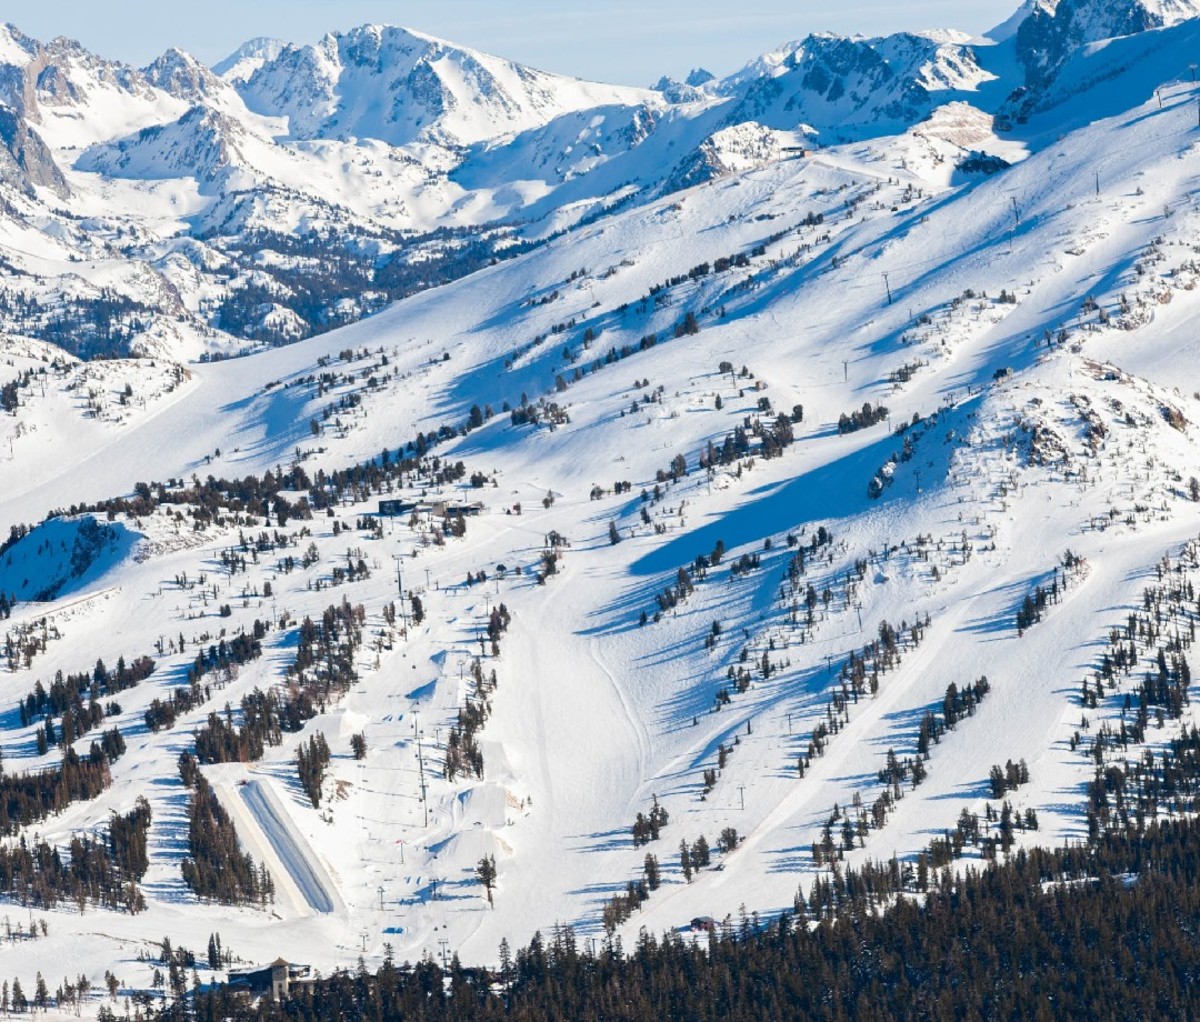 Full image of Mammoth Mountain with its snowboarding park in the lower left